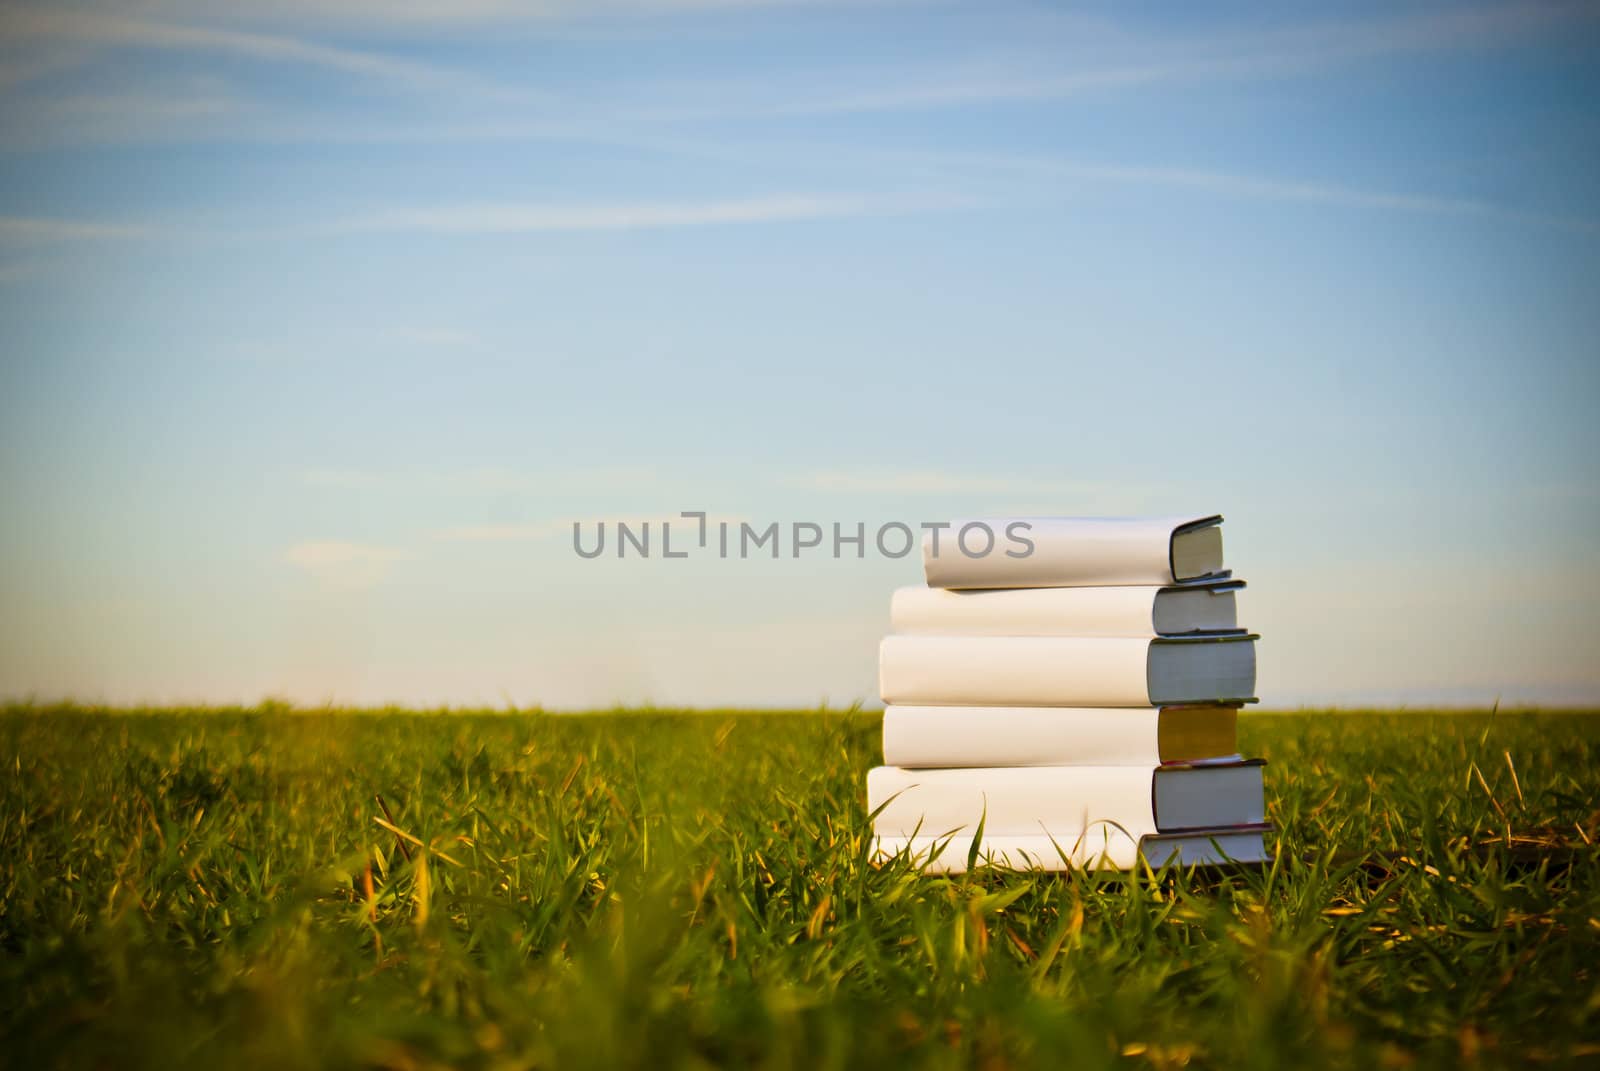 Books laying on grass